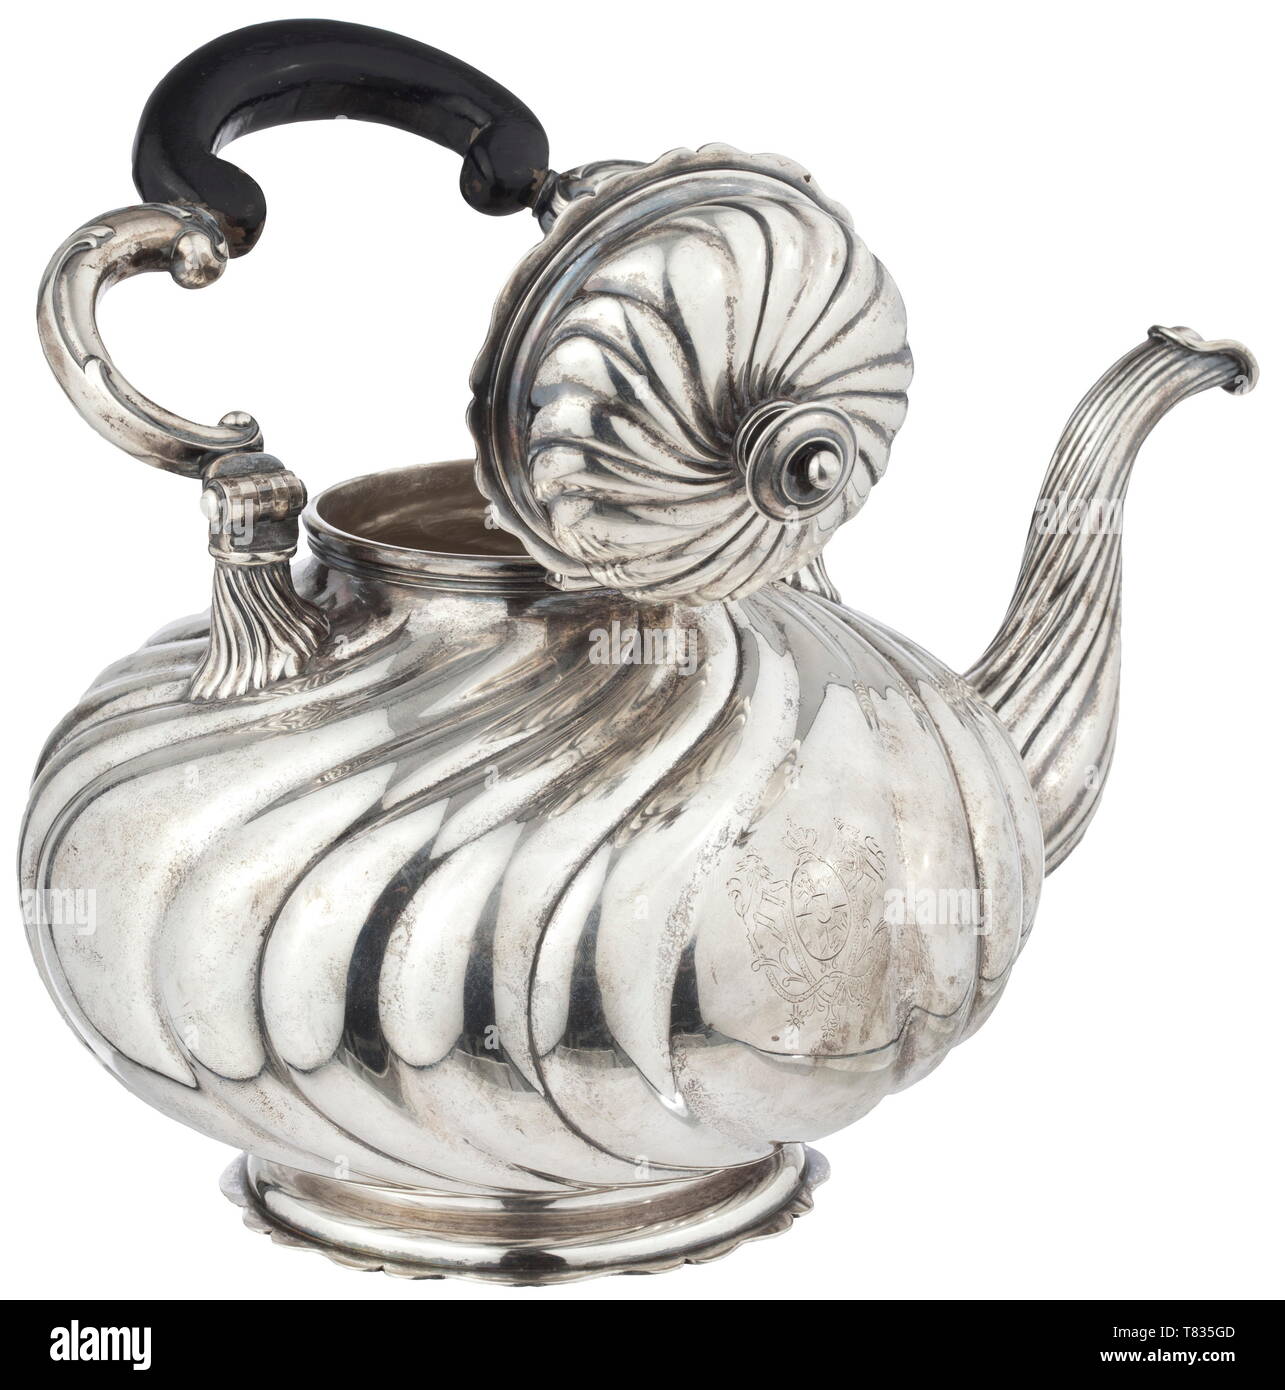 Ludwig II of Bavaria (1845 - 1886) - a tea-pot with a warmer Circa 1870. Round body flattened on both sides, gadrooned, 800 silver, on the bottom a mark of fineness with crescent moon and crown as well as a mark of the court jeweller 'Ed. Wollenweber', tubular spout, hinged lid, folding volute handle with blackened wood grip, crowned royal monogram and the Bavarian coat of arms. Corresponding silver warmer with holder for the burner, also decorated in a Neo-Baroque style. Signs of age and use. Total height circa 35 cm. Total weight circa 2,400 g., Additional-Rights-Clearance-Info-Not-Available Stock Photo